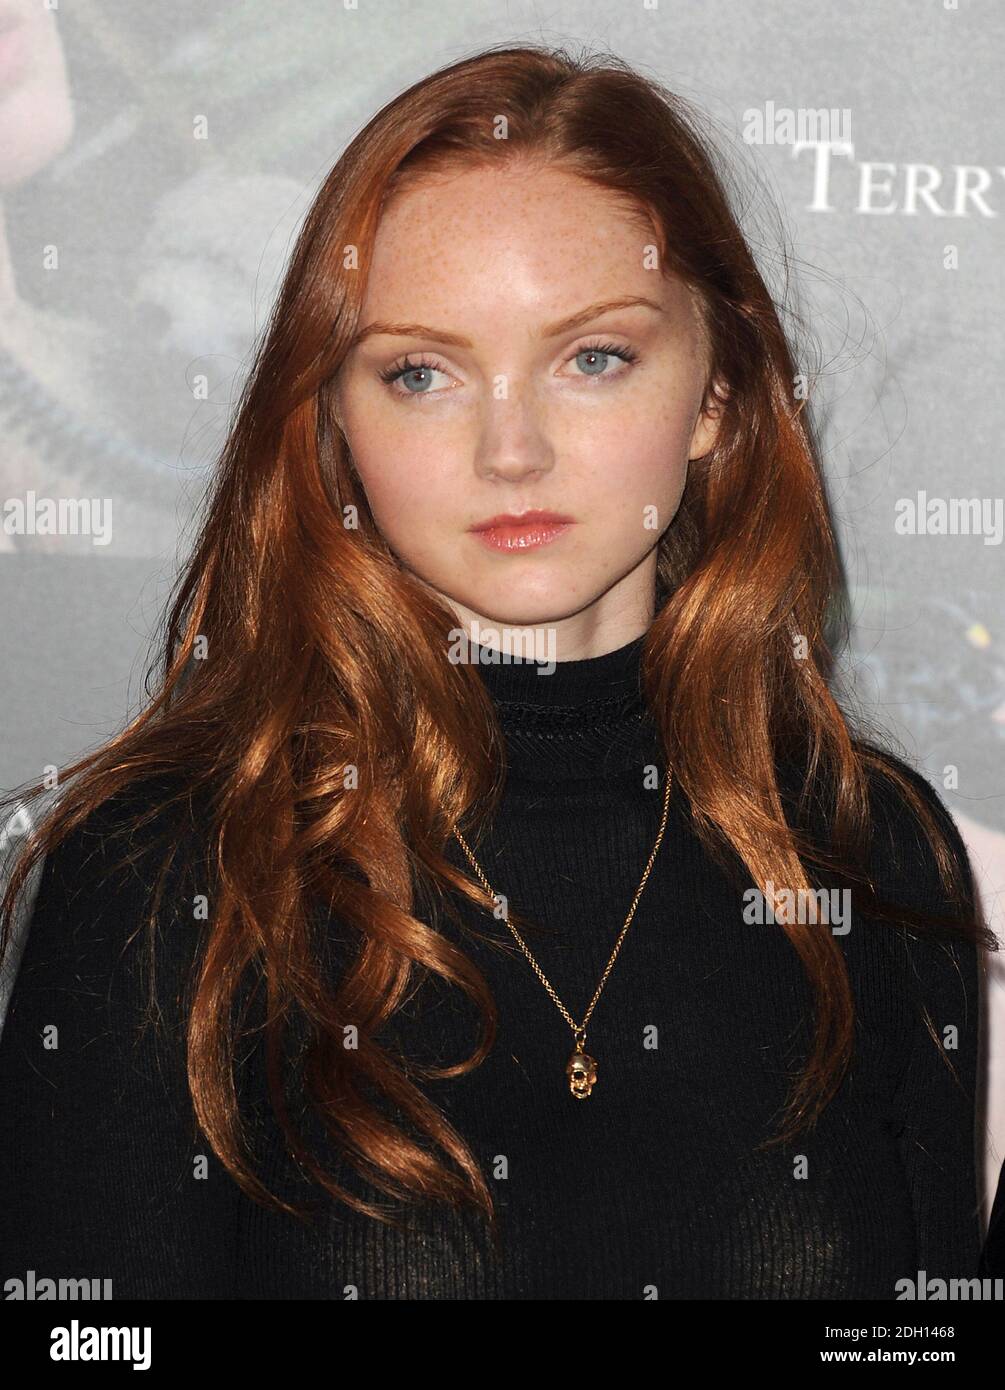 Pirelli model Lily Cole during the Pirelli Calendar 2010 Press Conference at the InterContinental Hotel on Park Lane, central London. Stock Photo